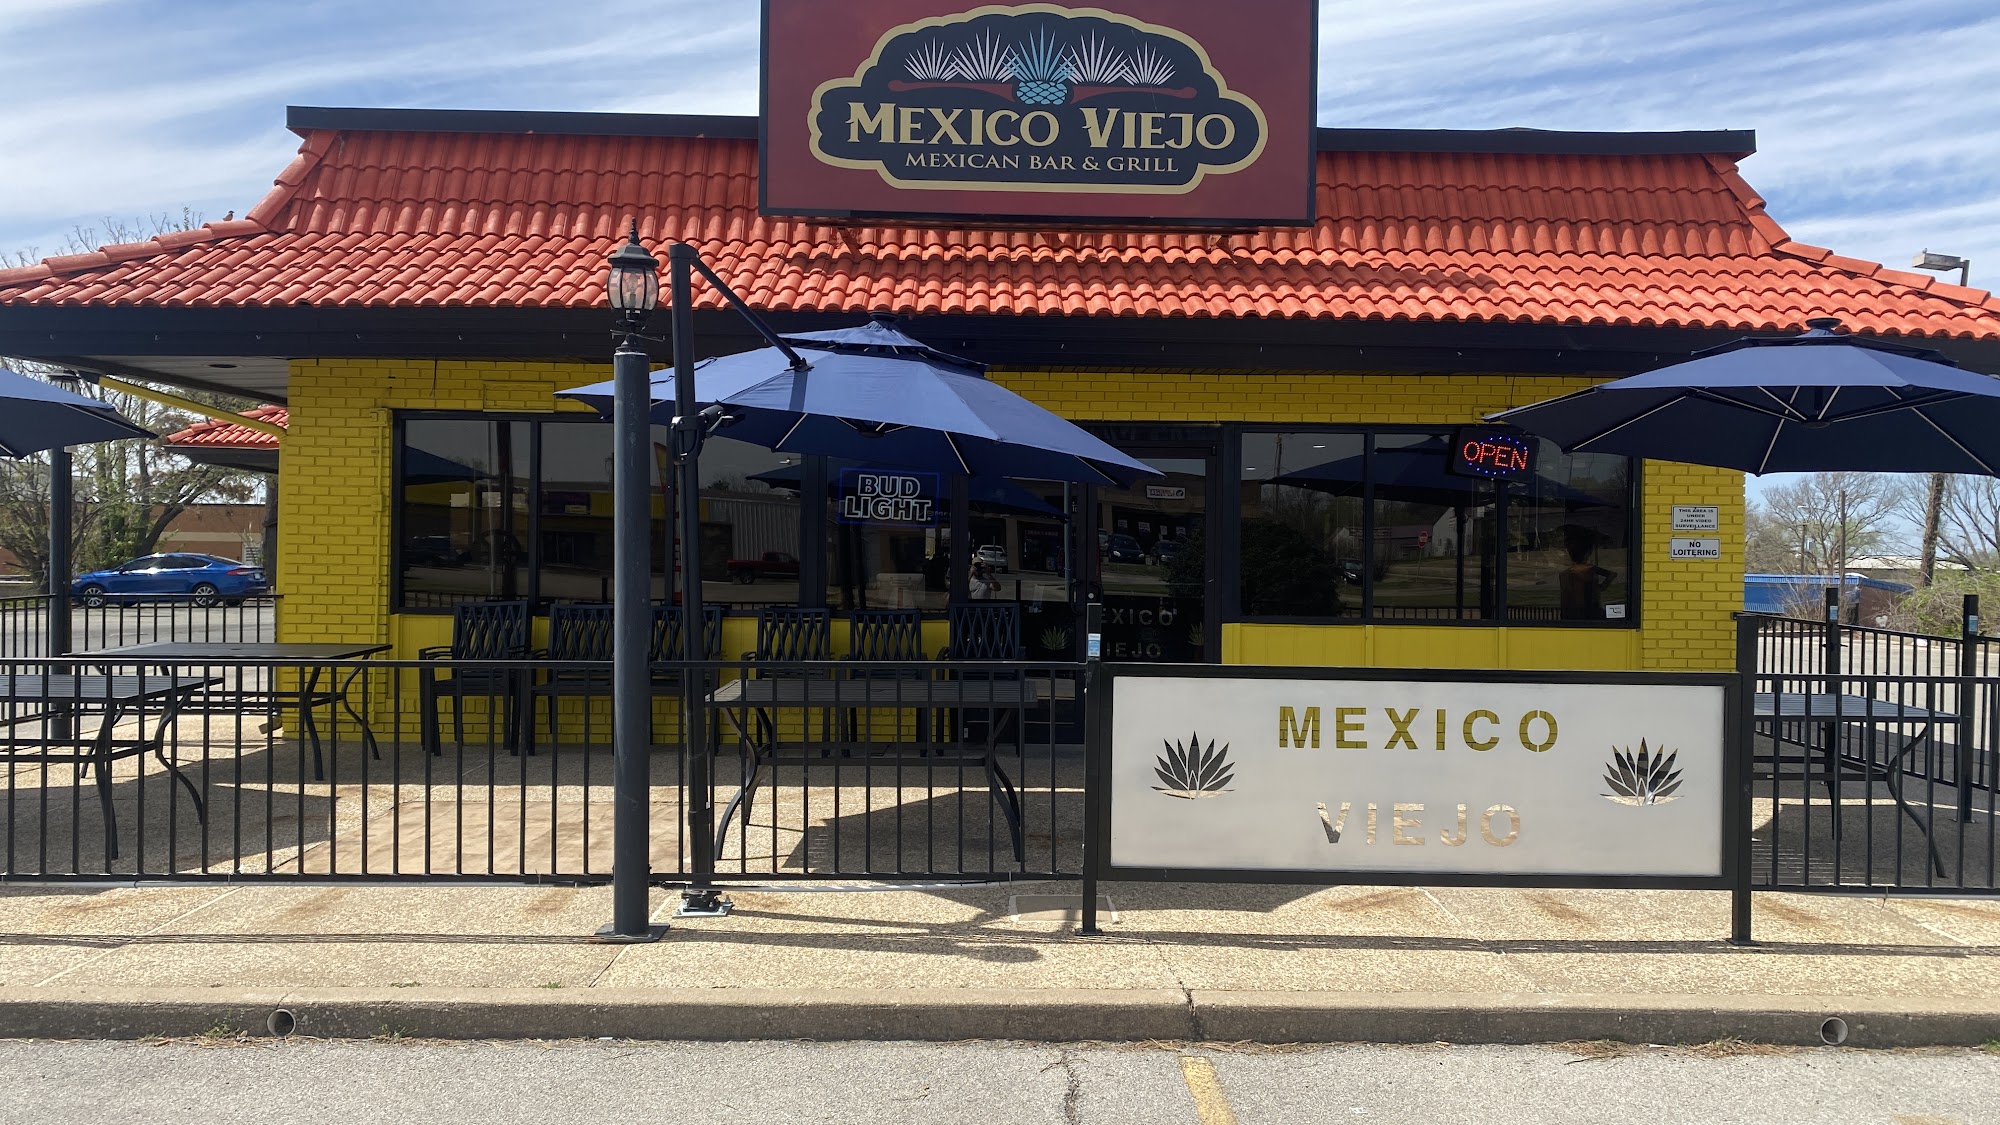 Mexican Viejo Bar and Grill